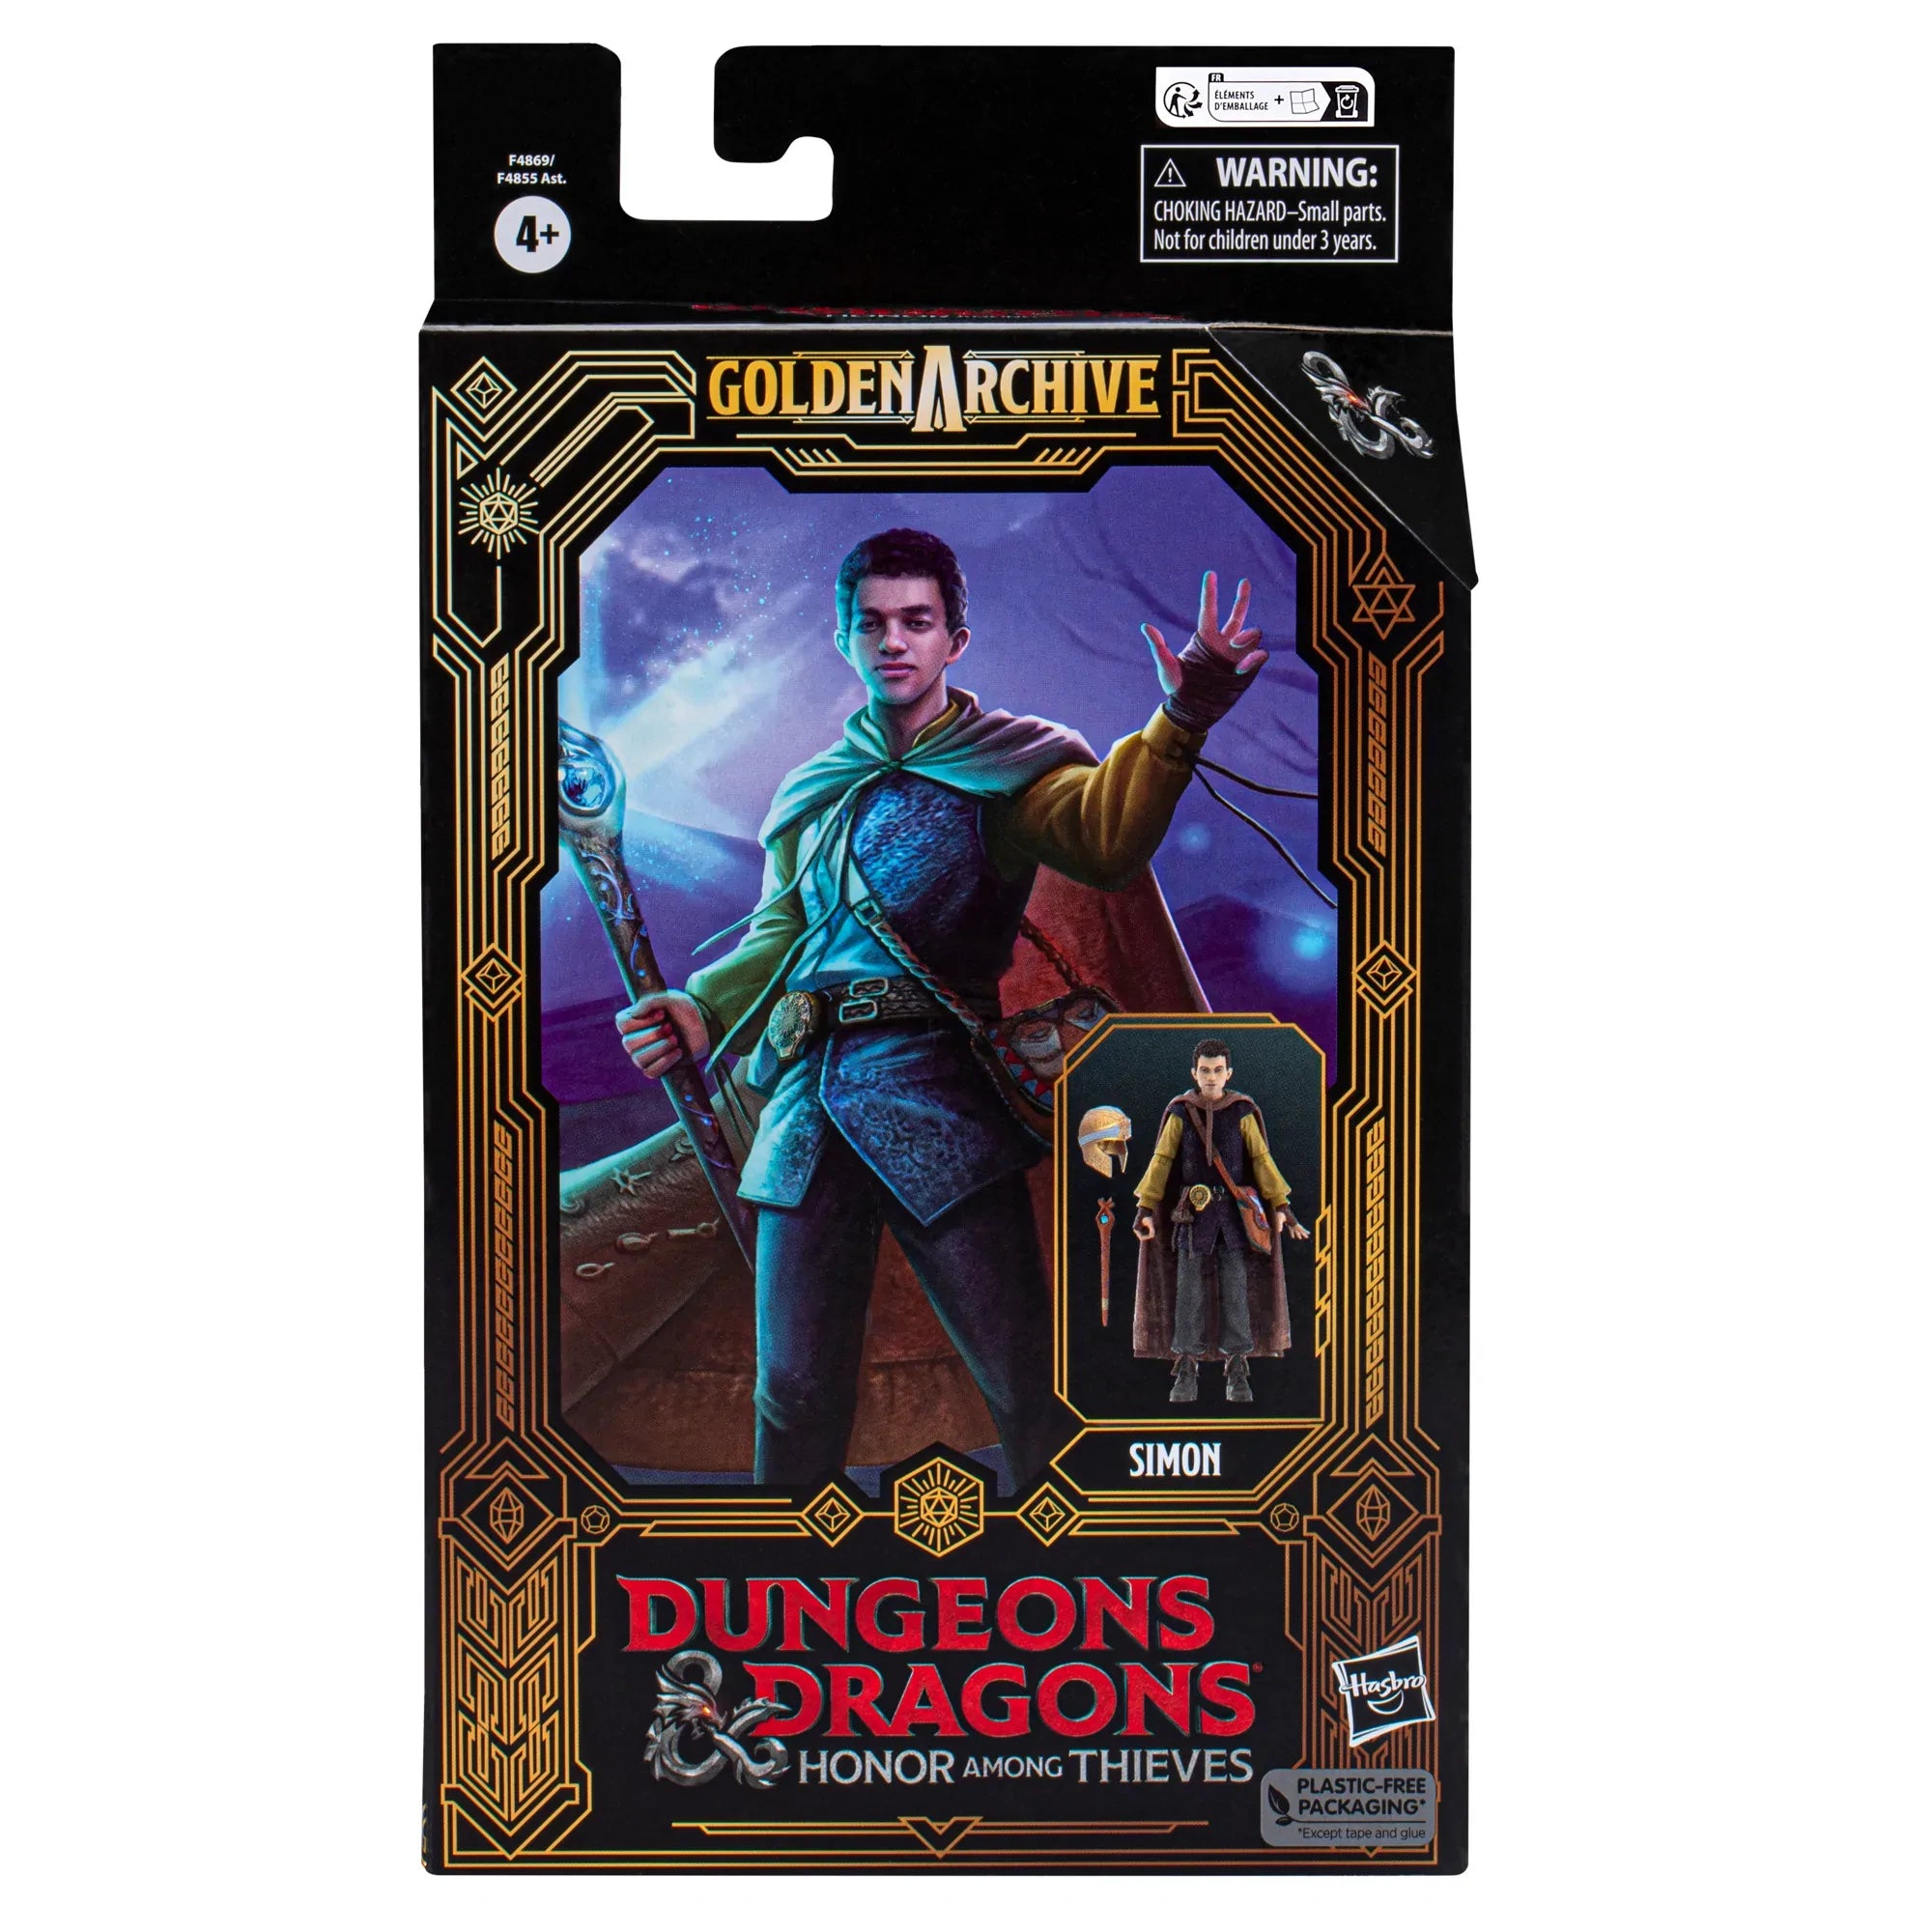 Dungeons & Dragons Golden Archive: Simon